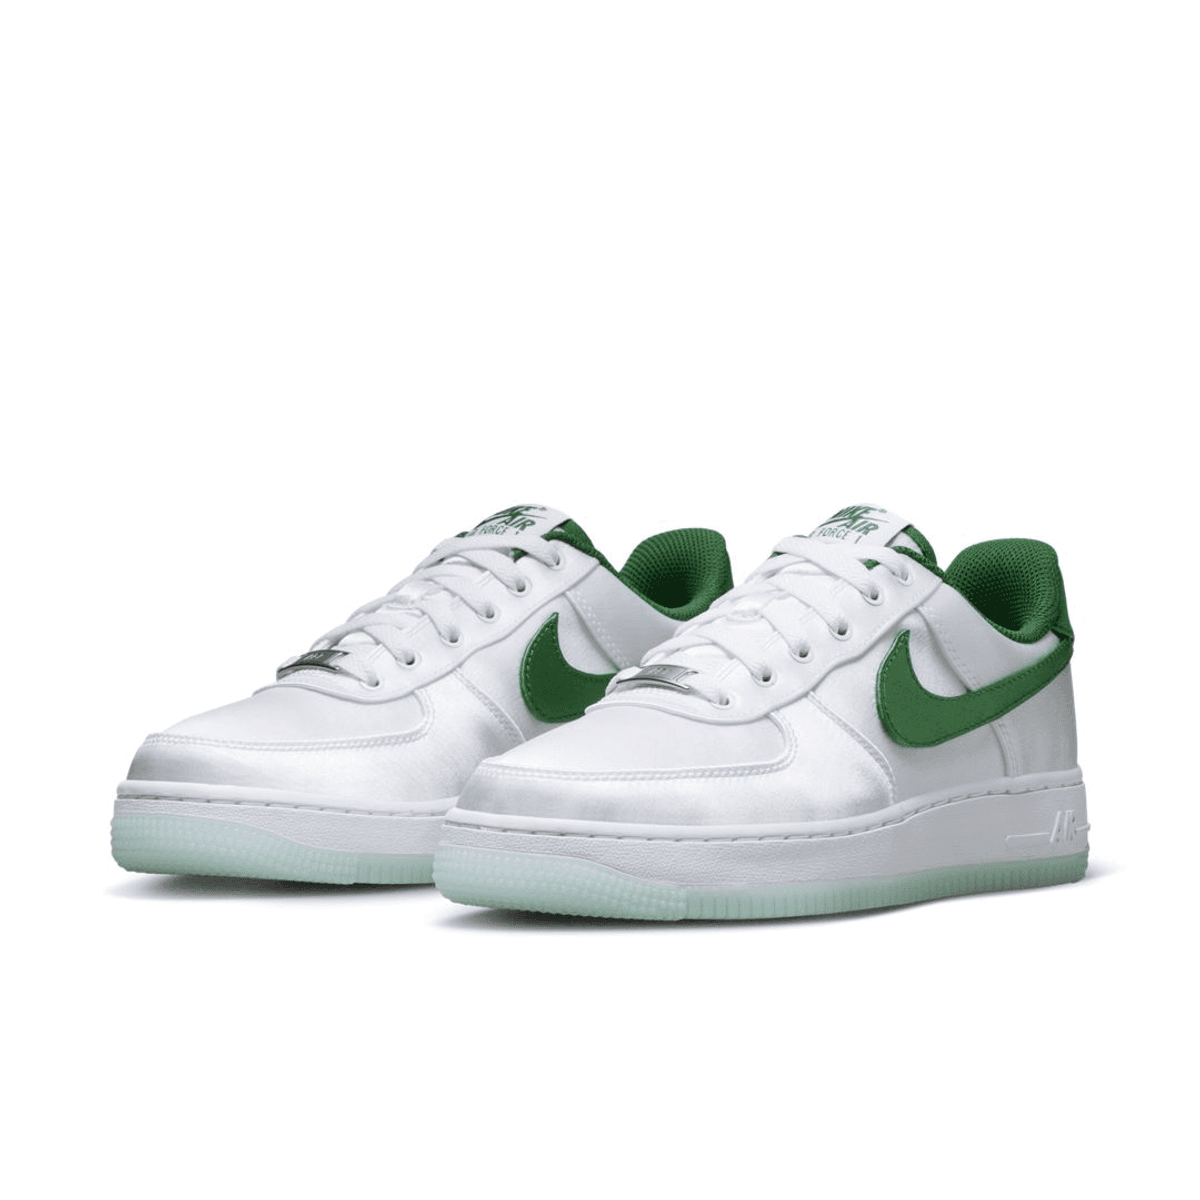 Nike Air Force 1 Low "Satin" Is As Clean And Shiny As Can Be